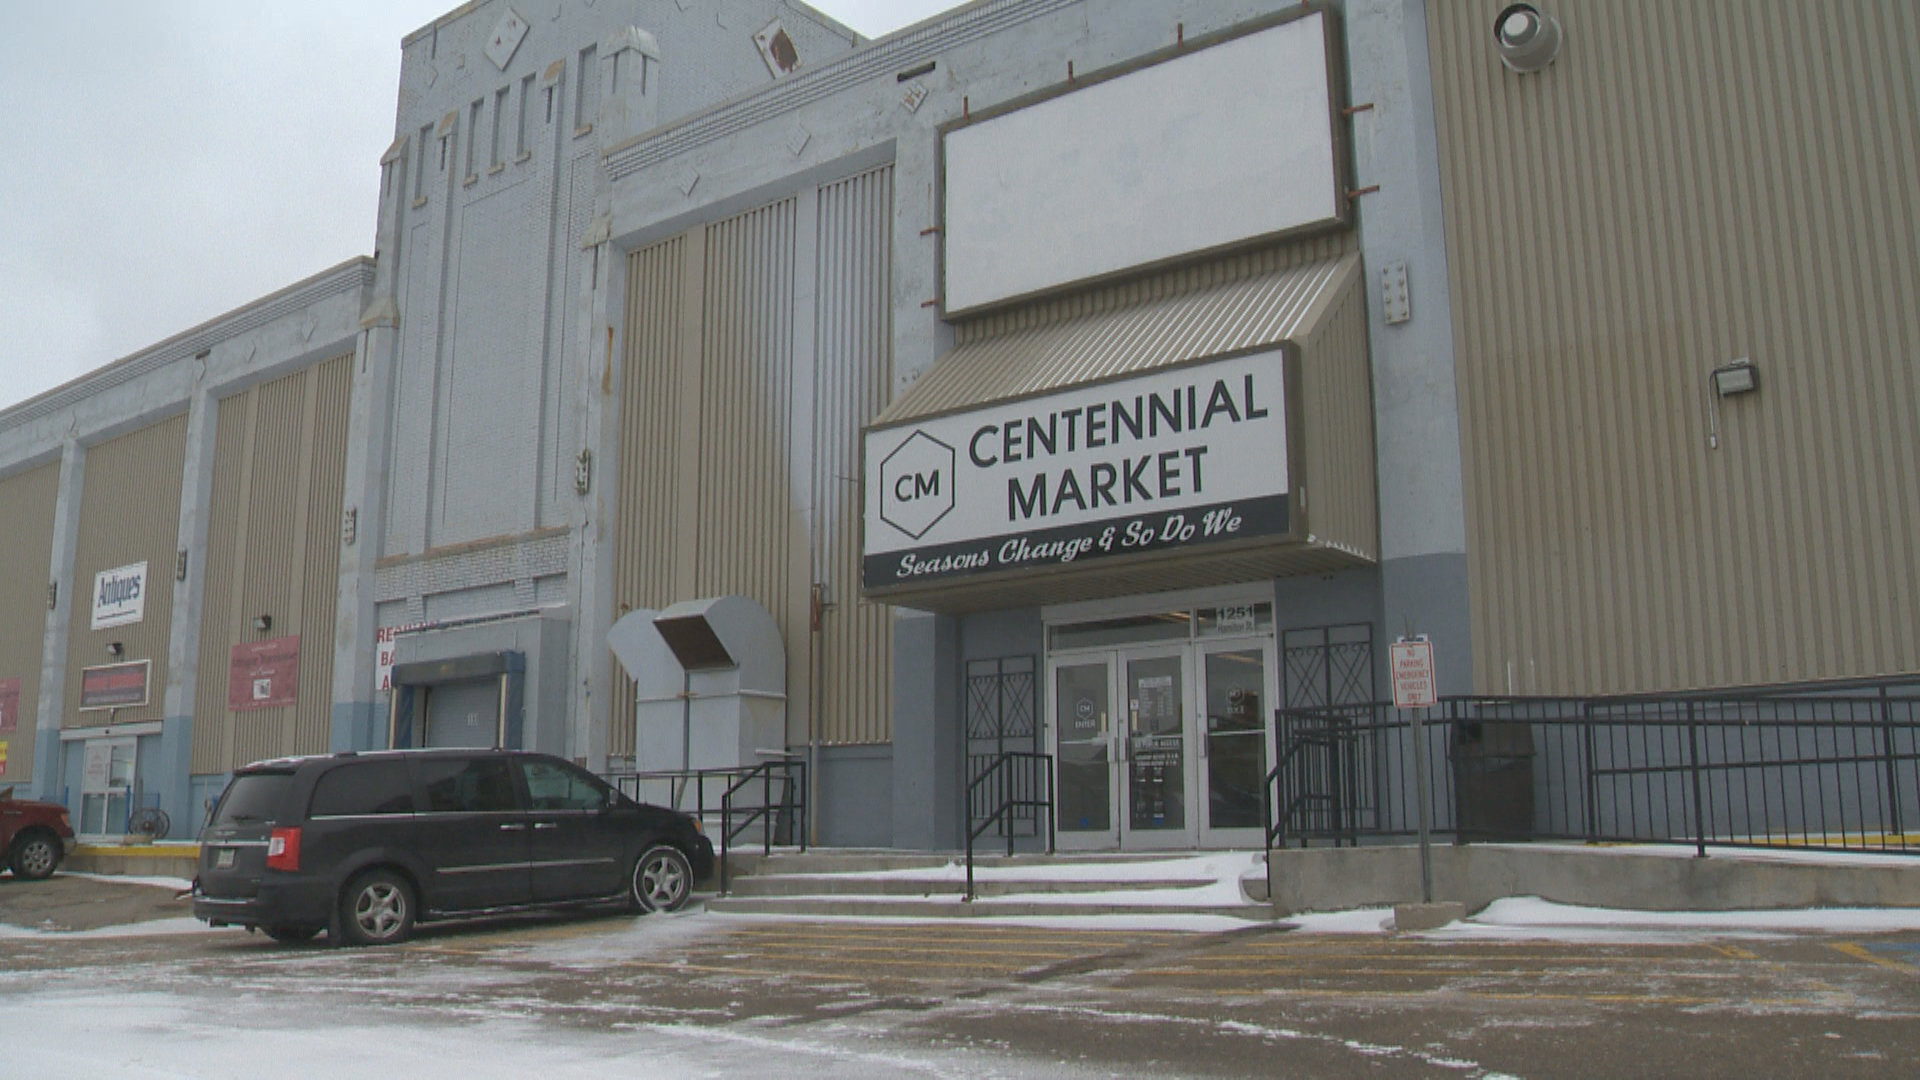 Regina's old Sears building will be closing its door end of May where local businesses and events will need to find a new location.